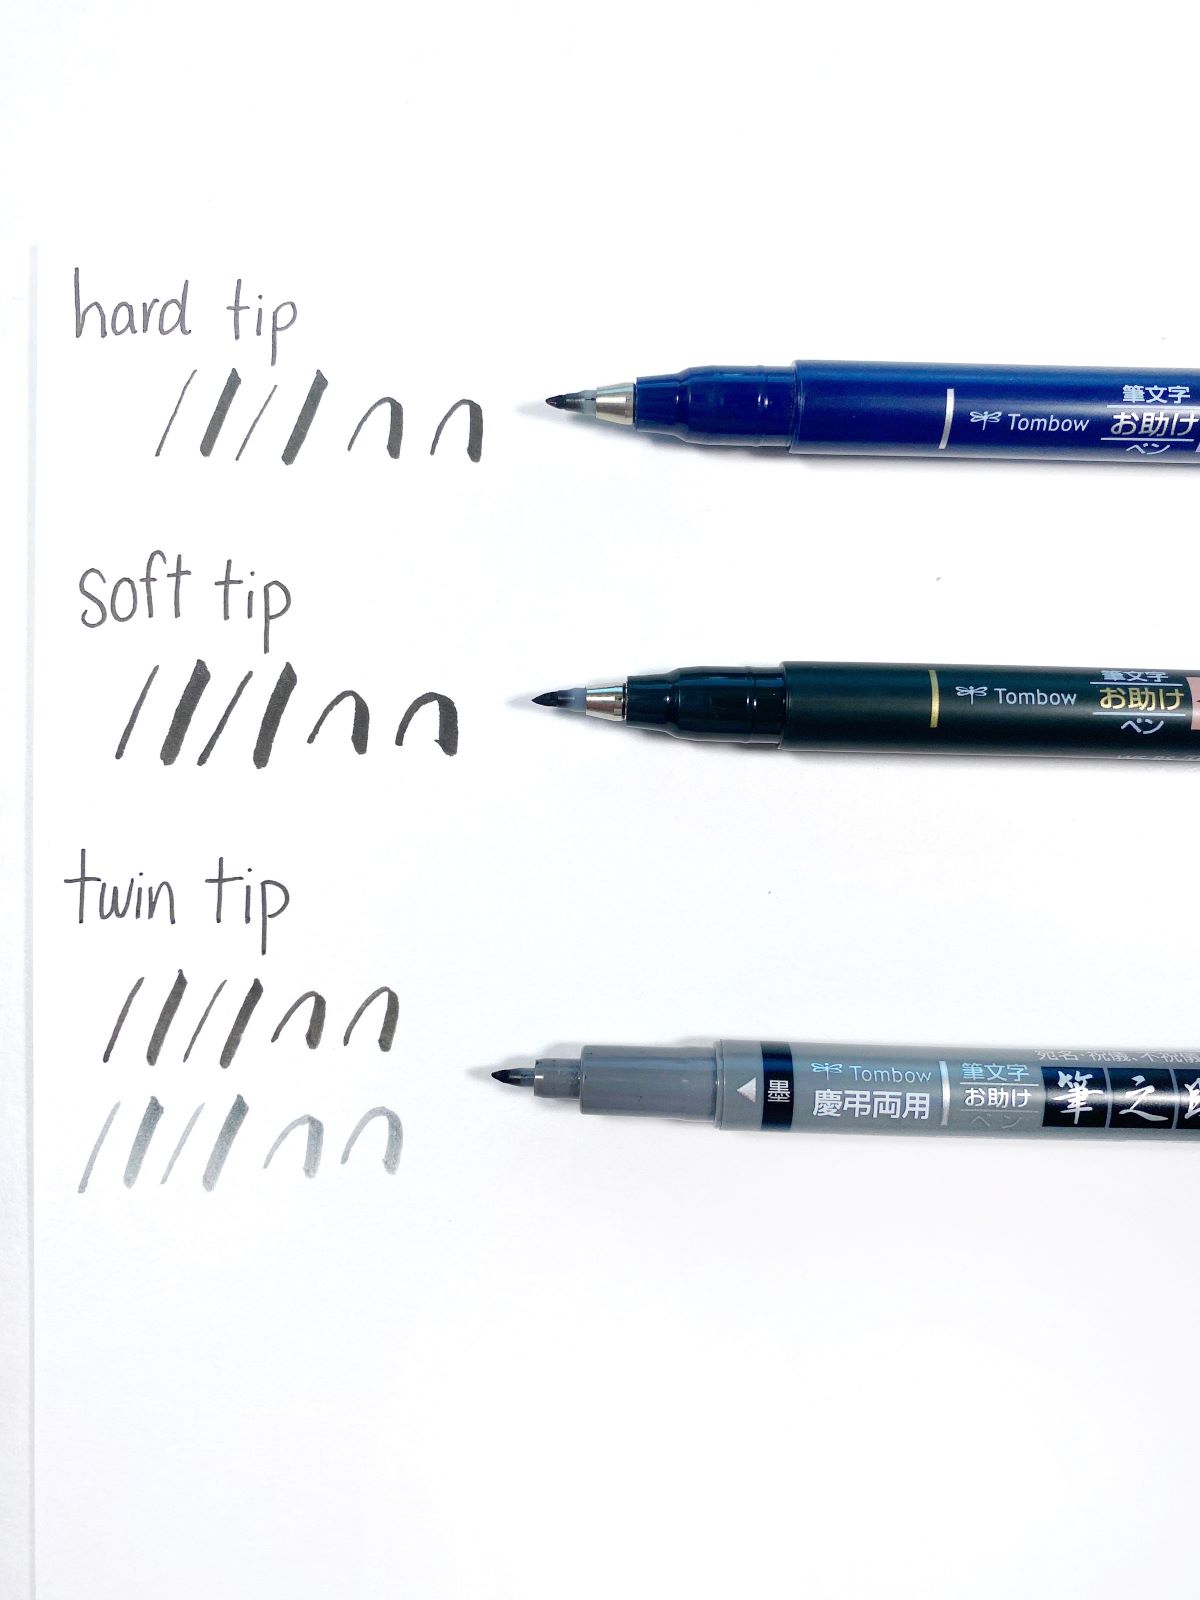 Tombow's Top 5 Tools For Lettering! #tombow #lettering